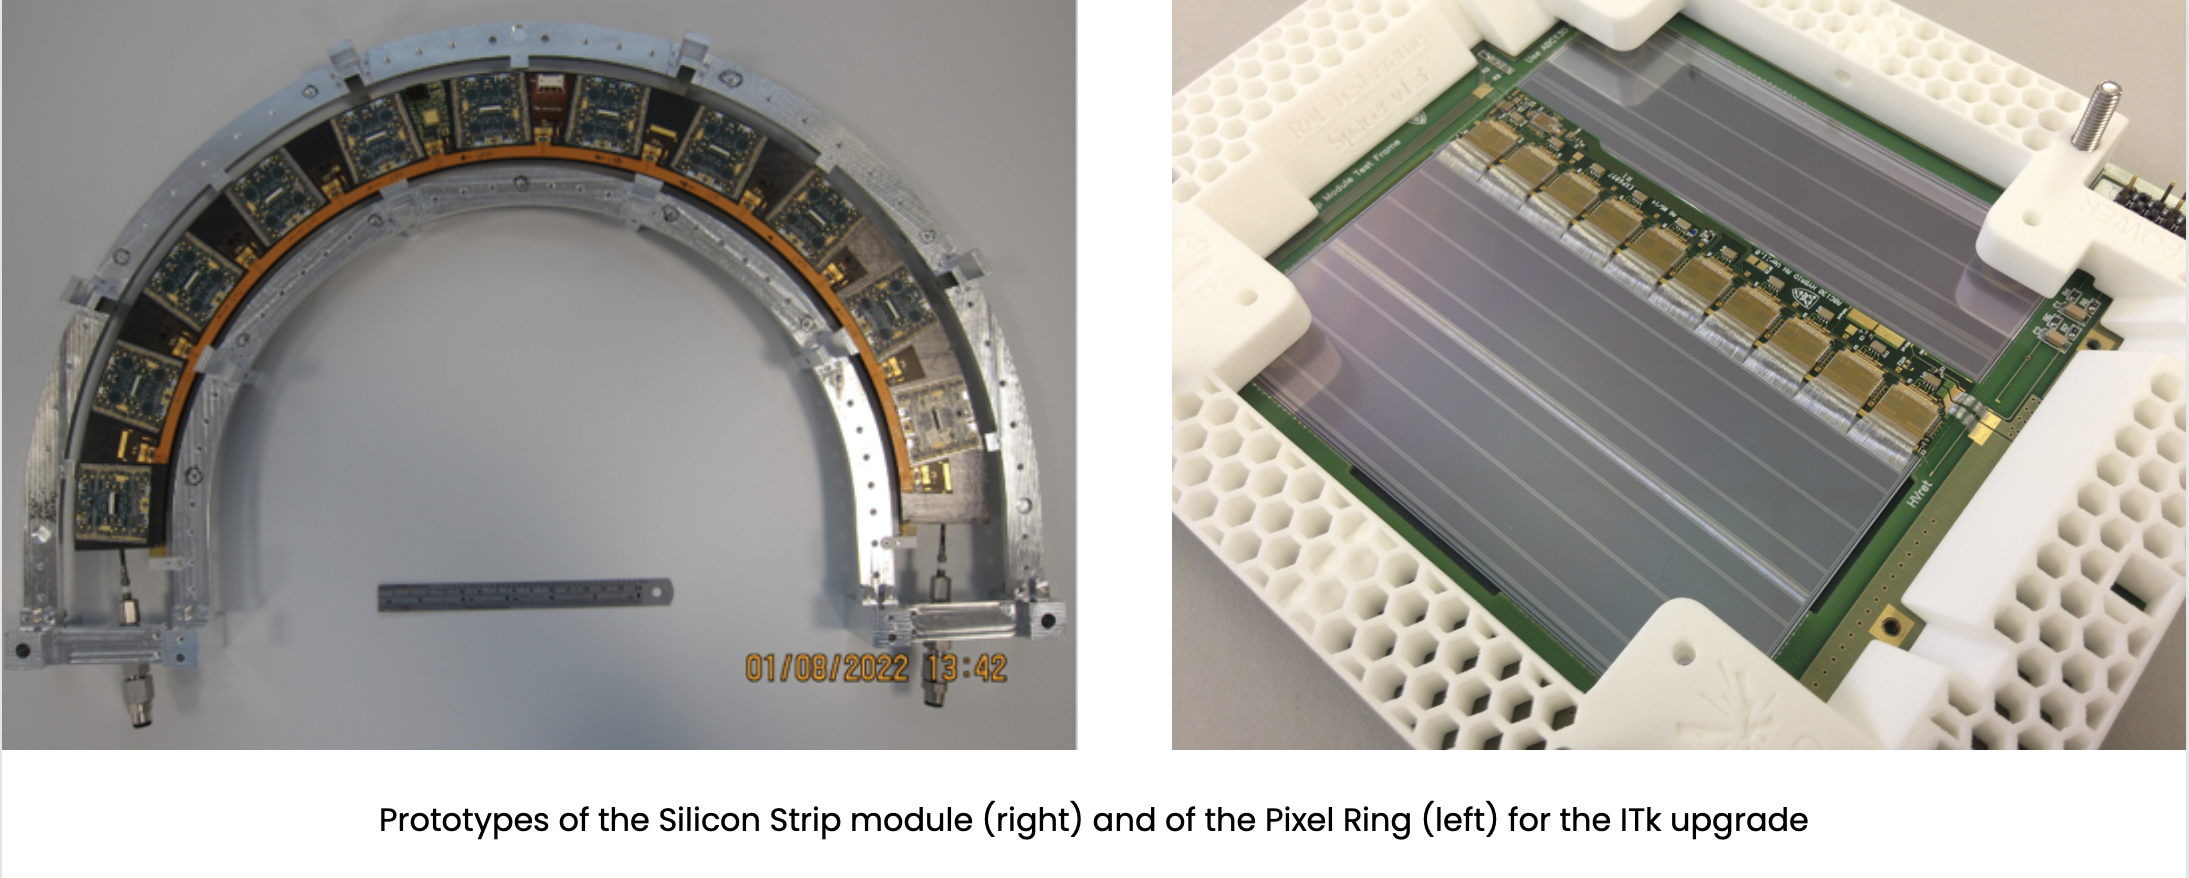 Prototypes of the Pixel Ring (left) and the Silicon Strip Module (right) for the ITk upgrade